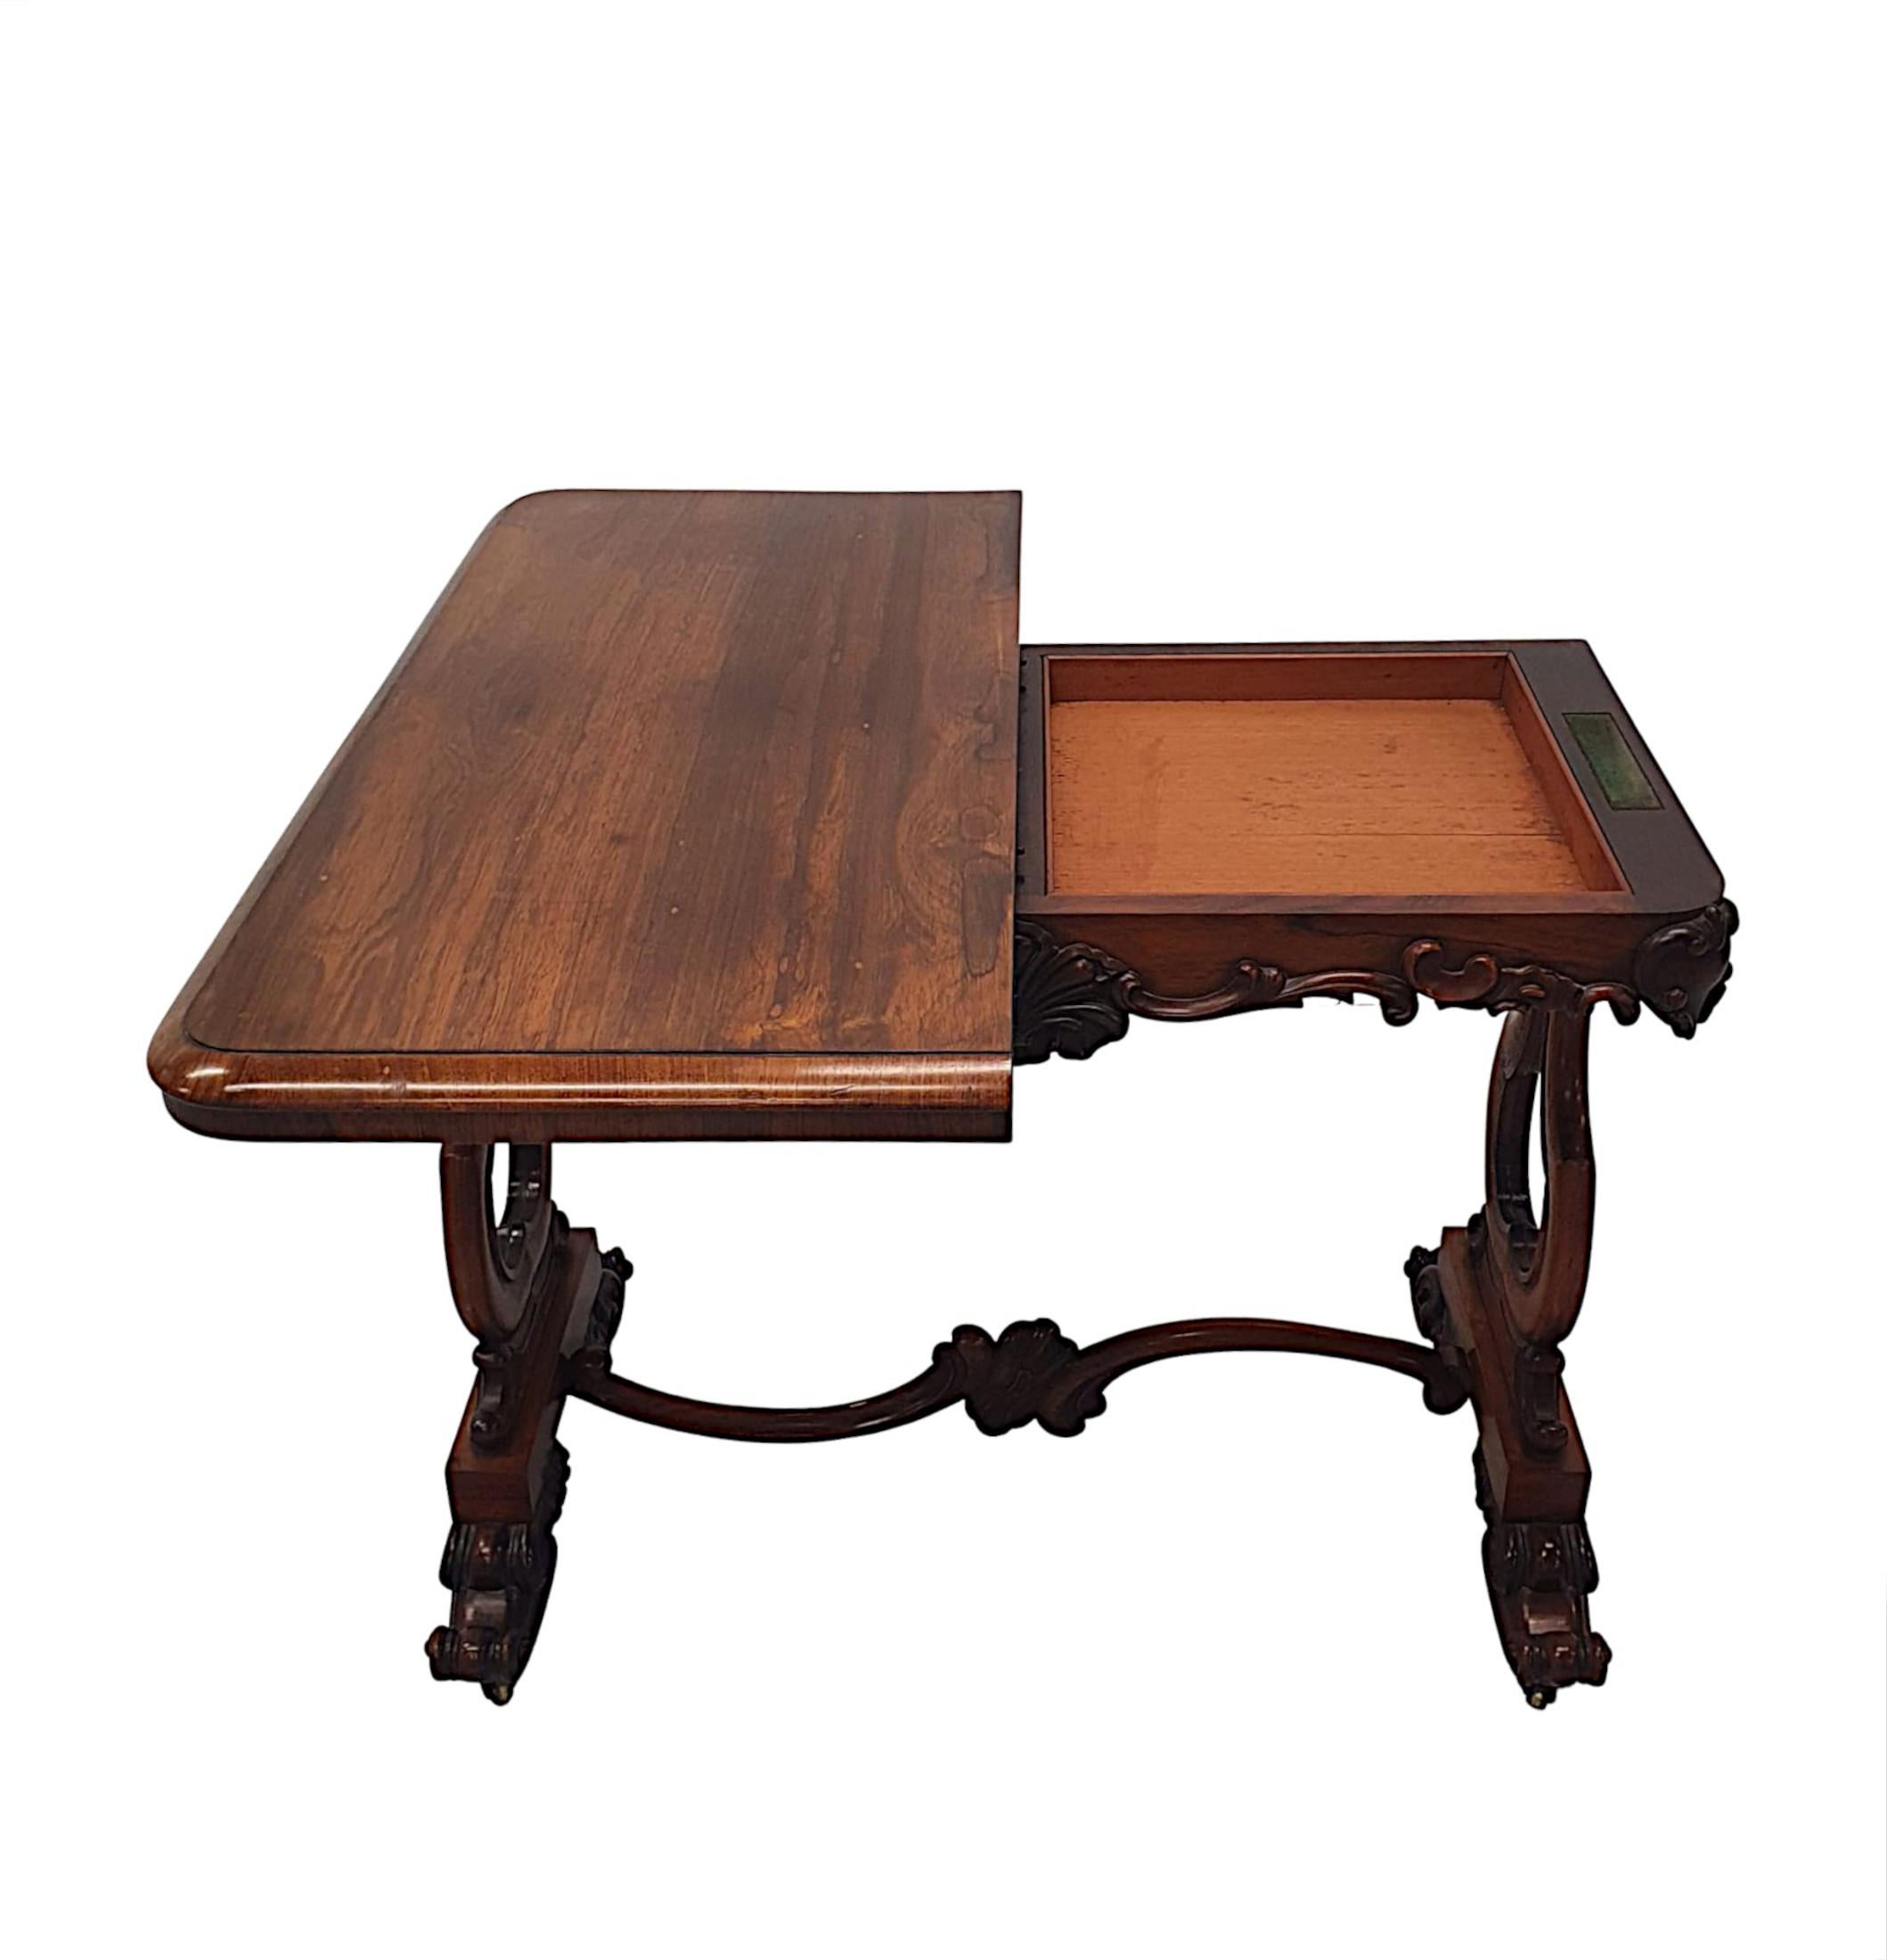 Rare and Unusual Early 19th Century Turn over Leaf Card Table For Sale 1